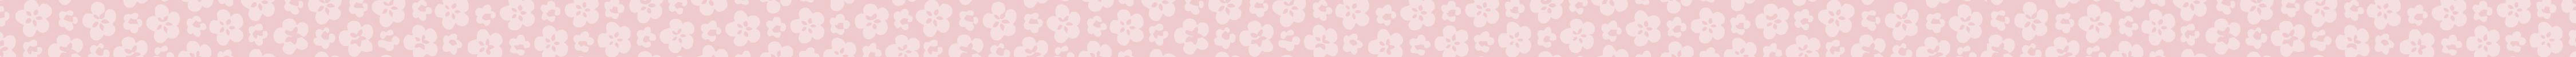 pink banner with cherry blossom print scrolling a long way to the right!